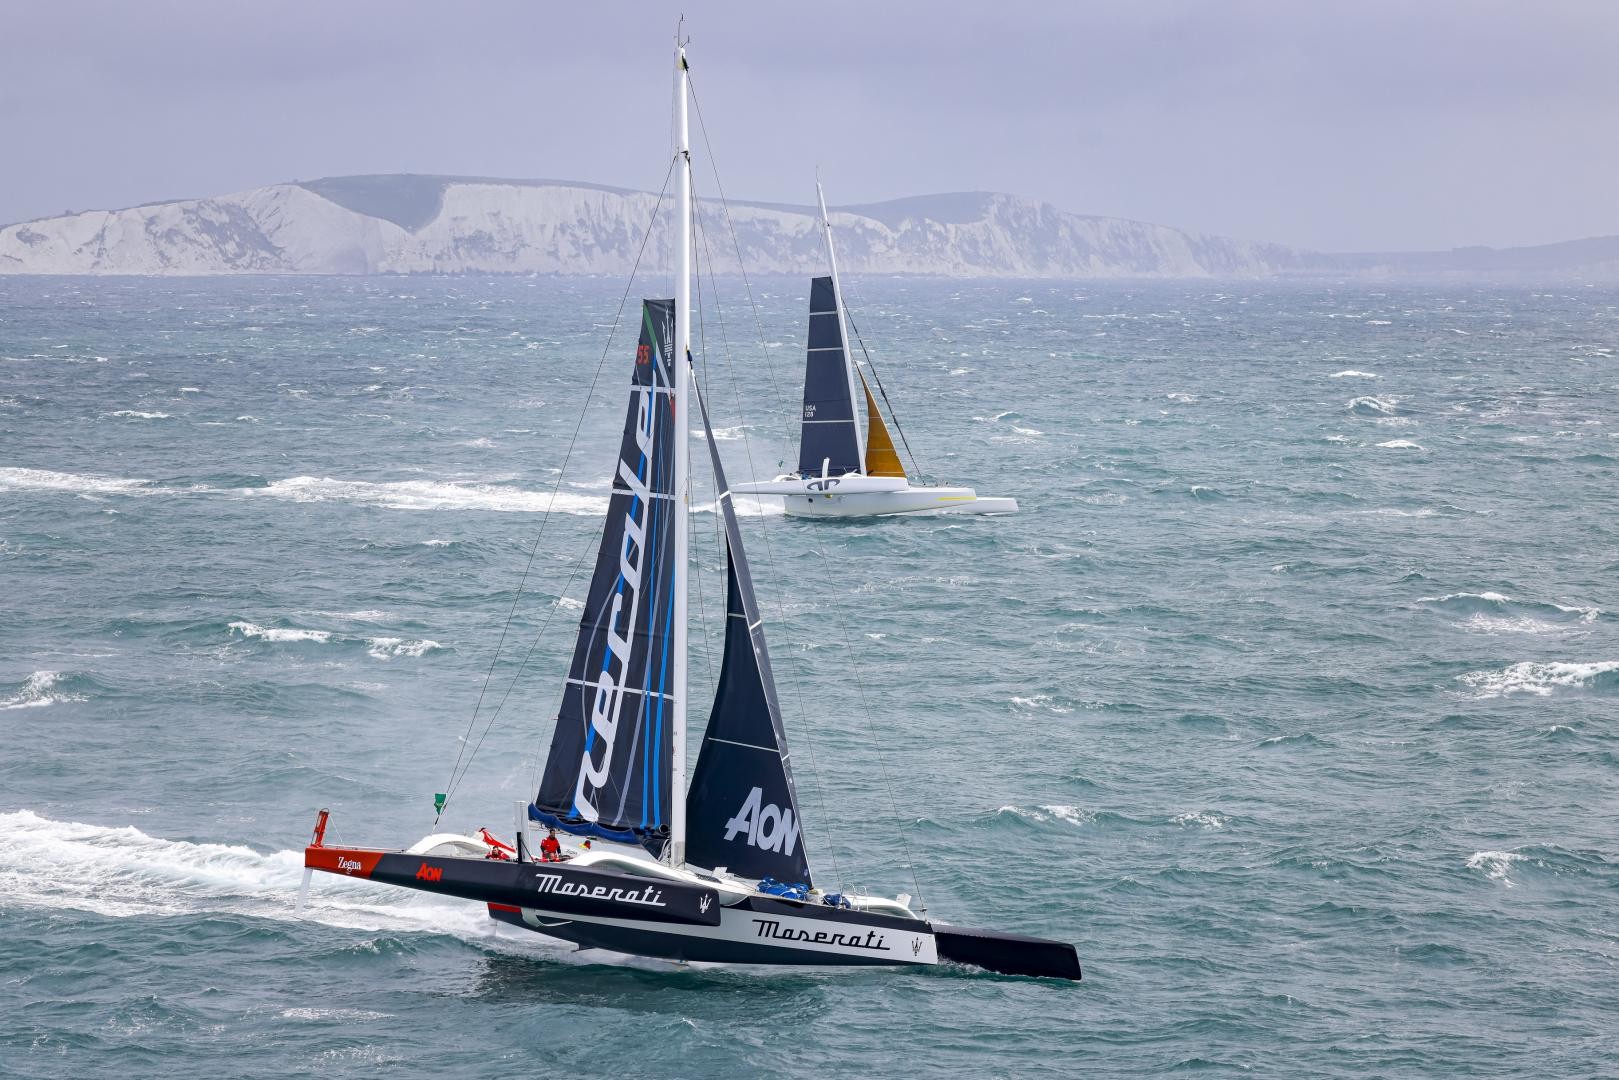 Maserati and Soldini crossed the finish line of the Rolex Middle Sea Race